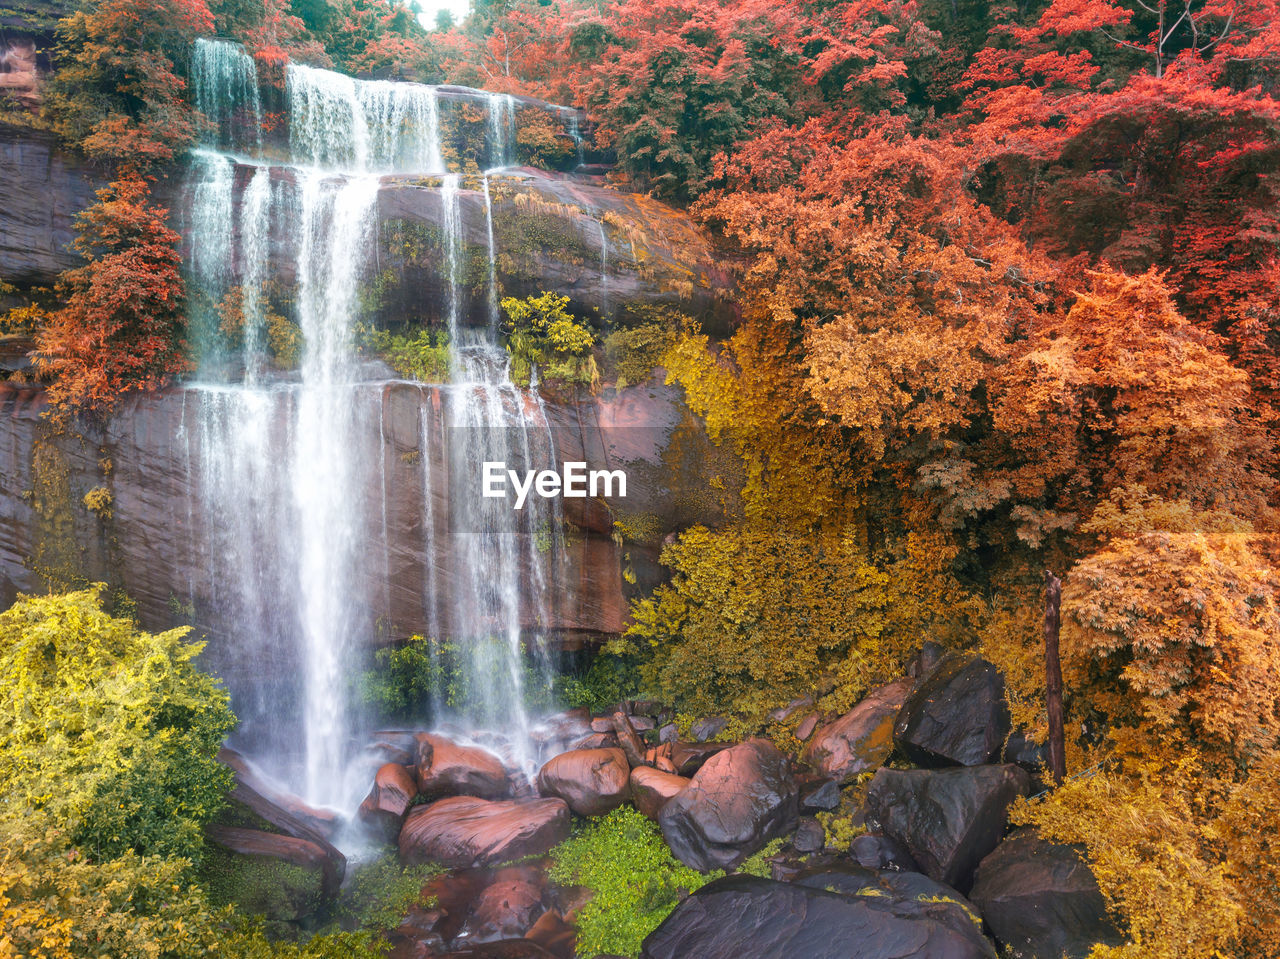 SCENIC VIEW OF WATERFALL DURING AUTUMN